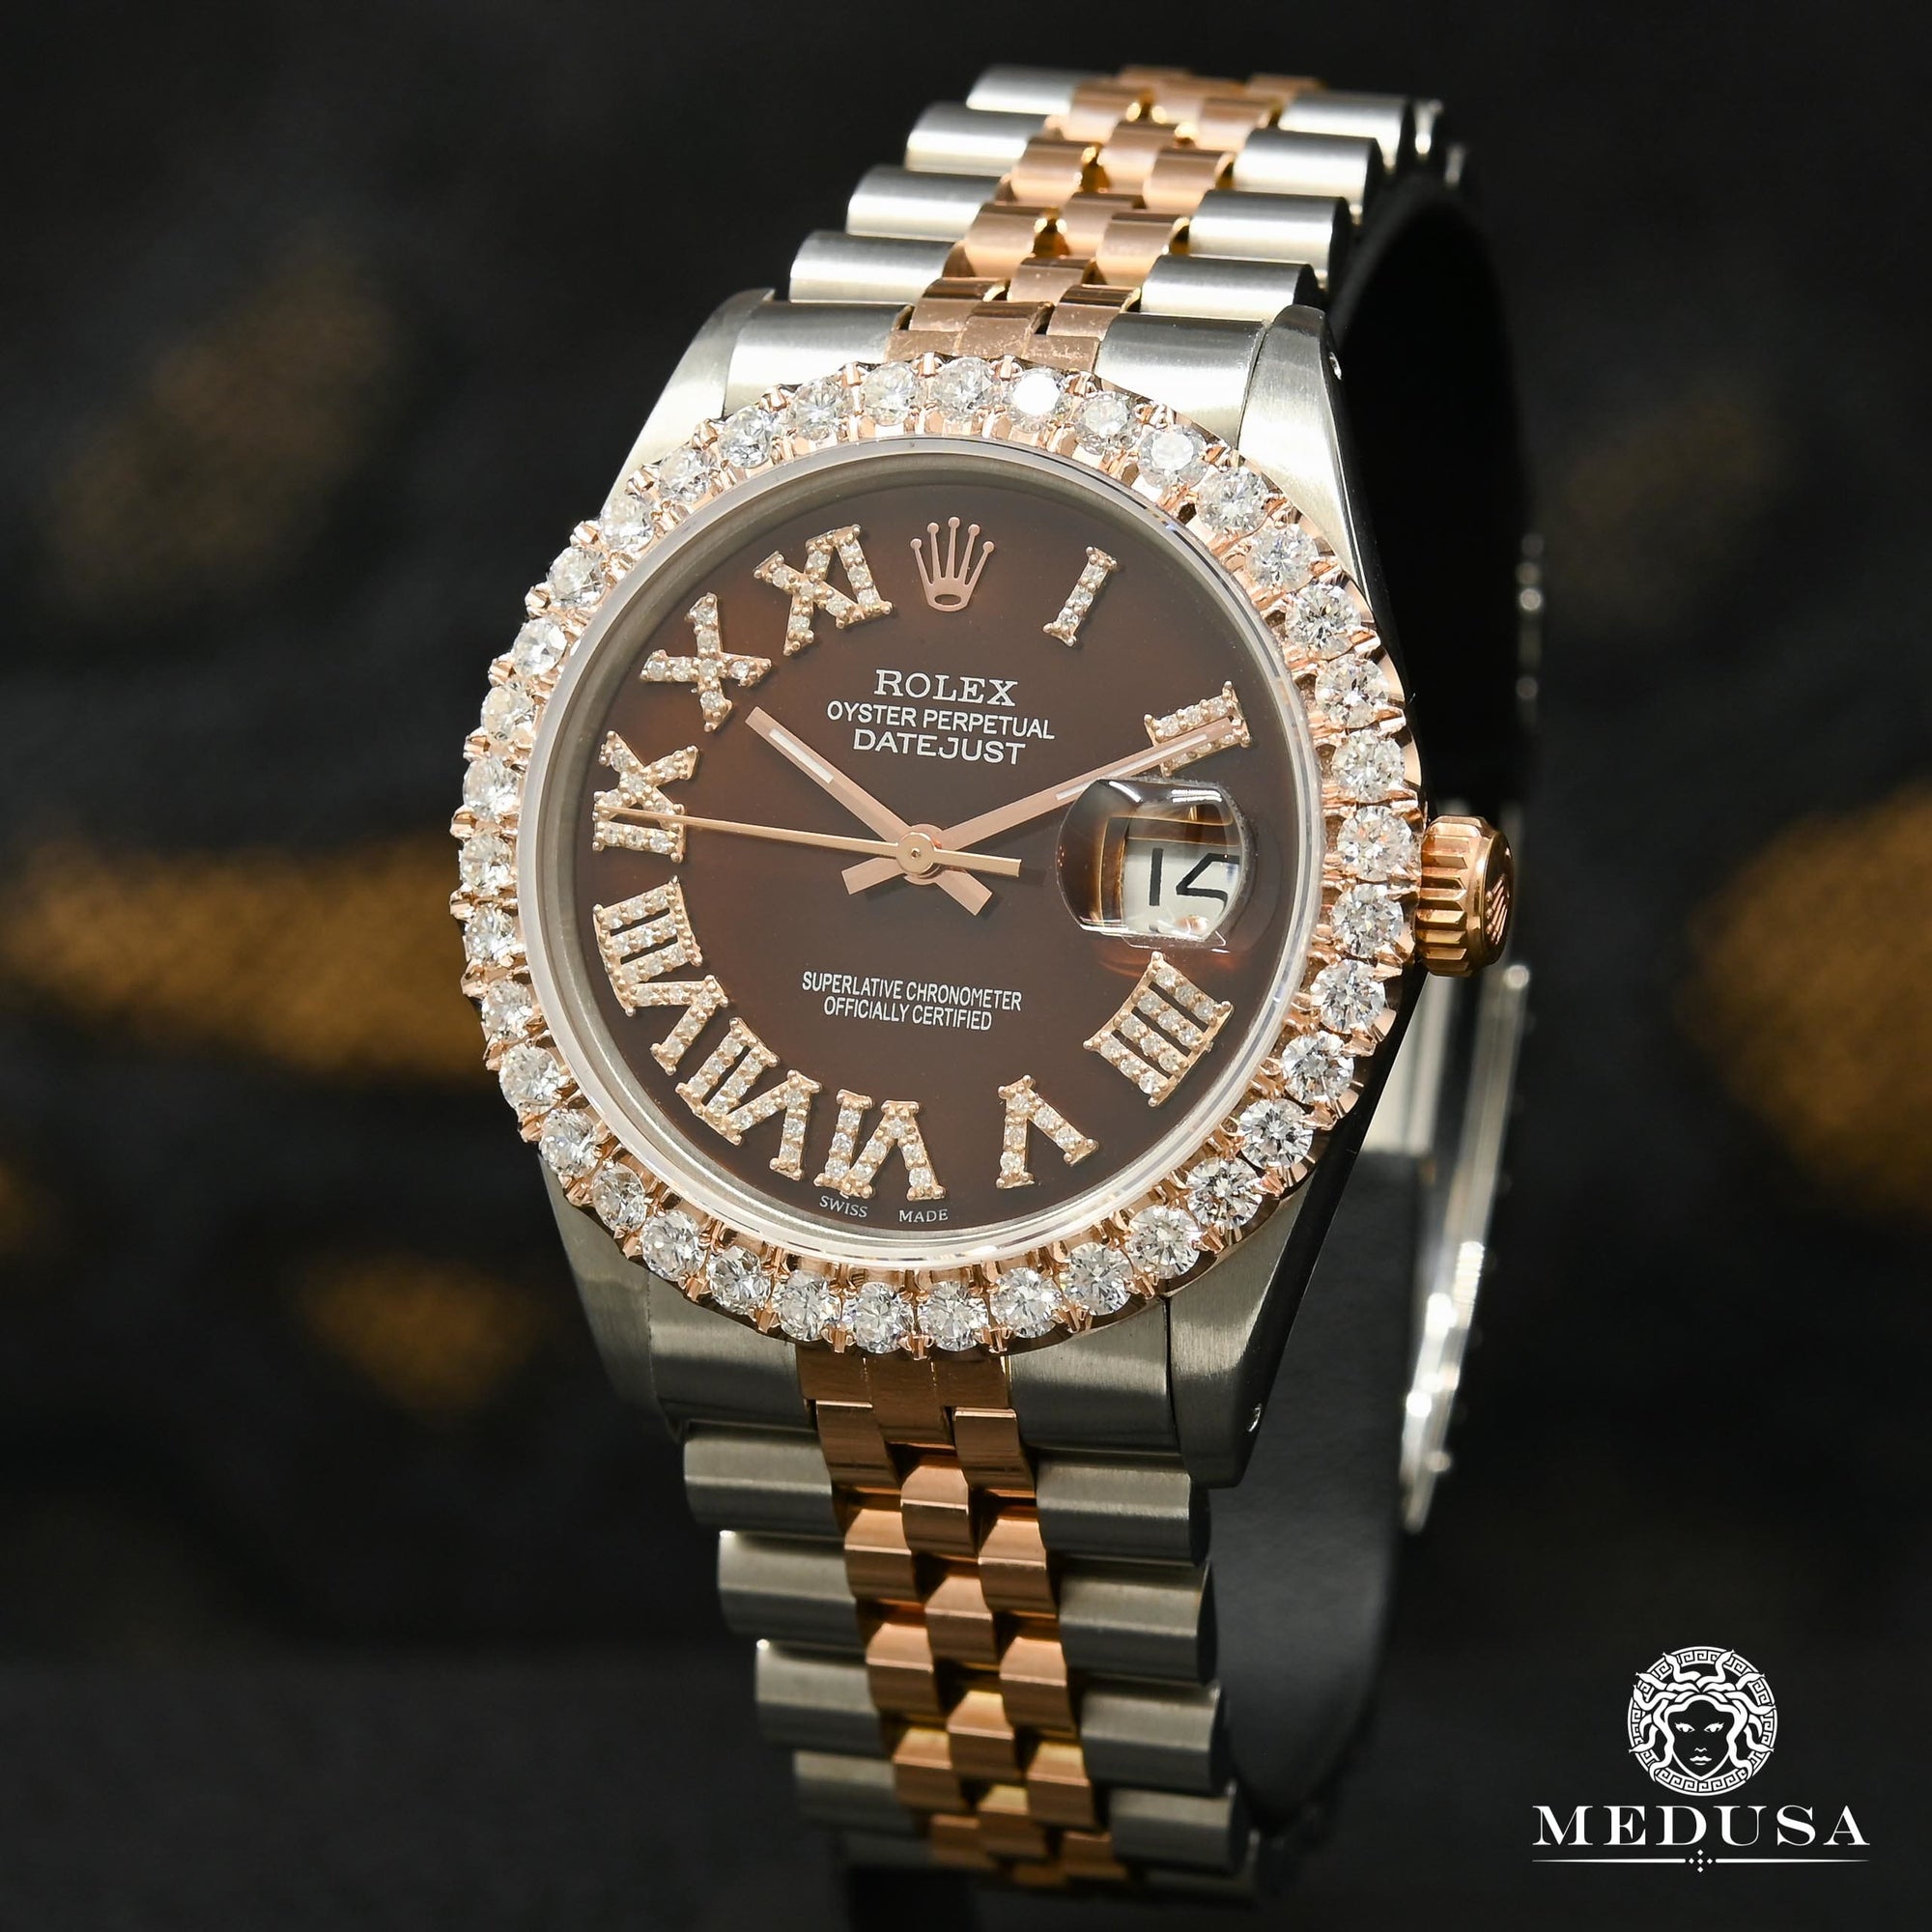 Montre Rolex | Homme Datejust 36mm - Rose 2 Tons Chocolate Or